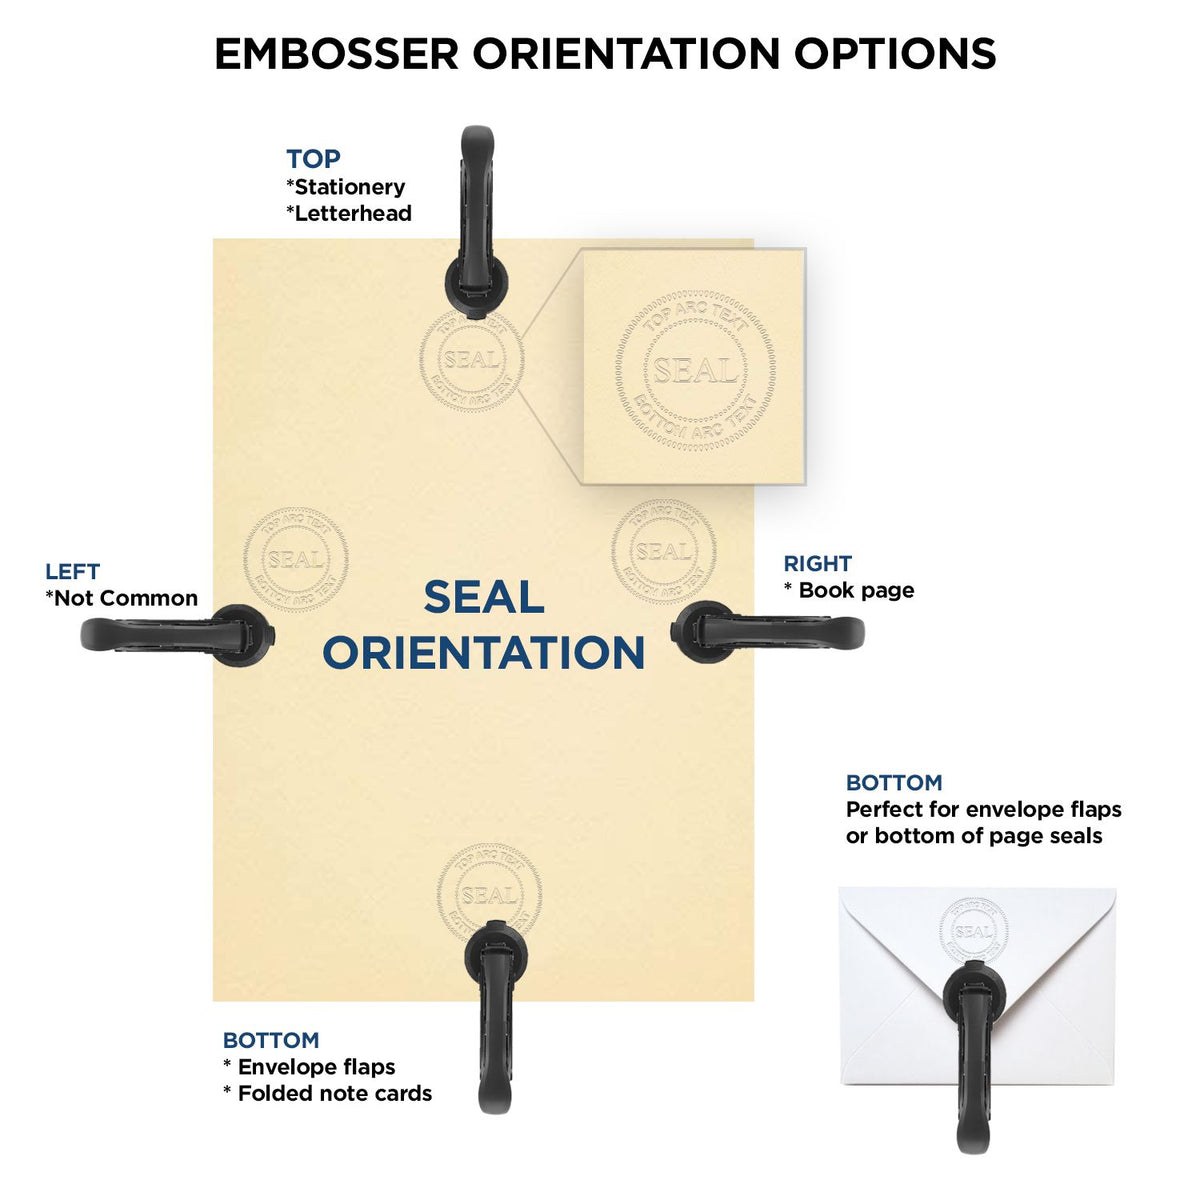 An infographic for the Delaware Desk Surveyor Seal Embosser showing embosser orientation, this is showing examples of a top, bottom, right and left insert.